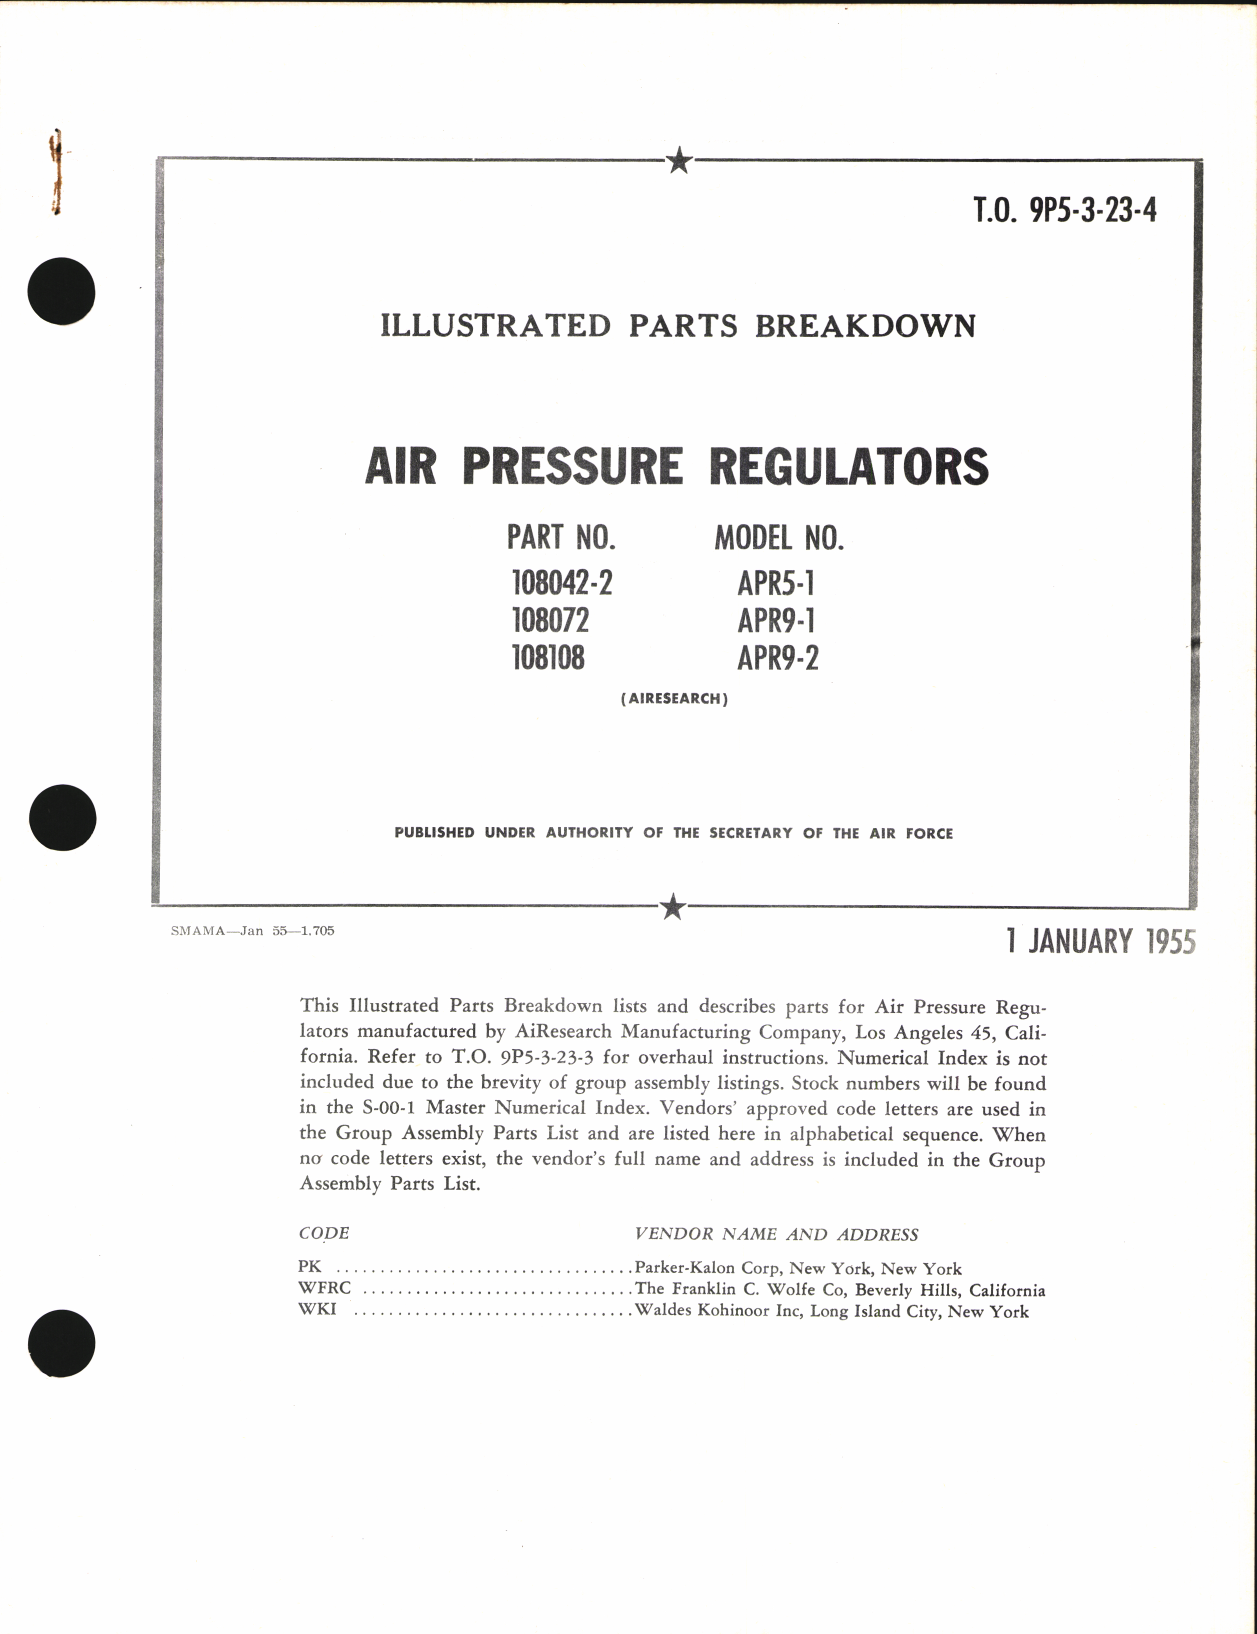 Sample page 1 from AirCorps Library document: Illustrated Parts Breakdown for Air Pressure Regulators 